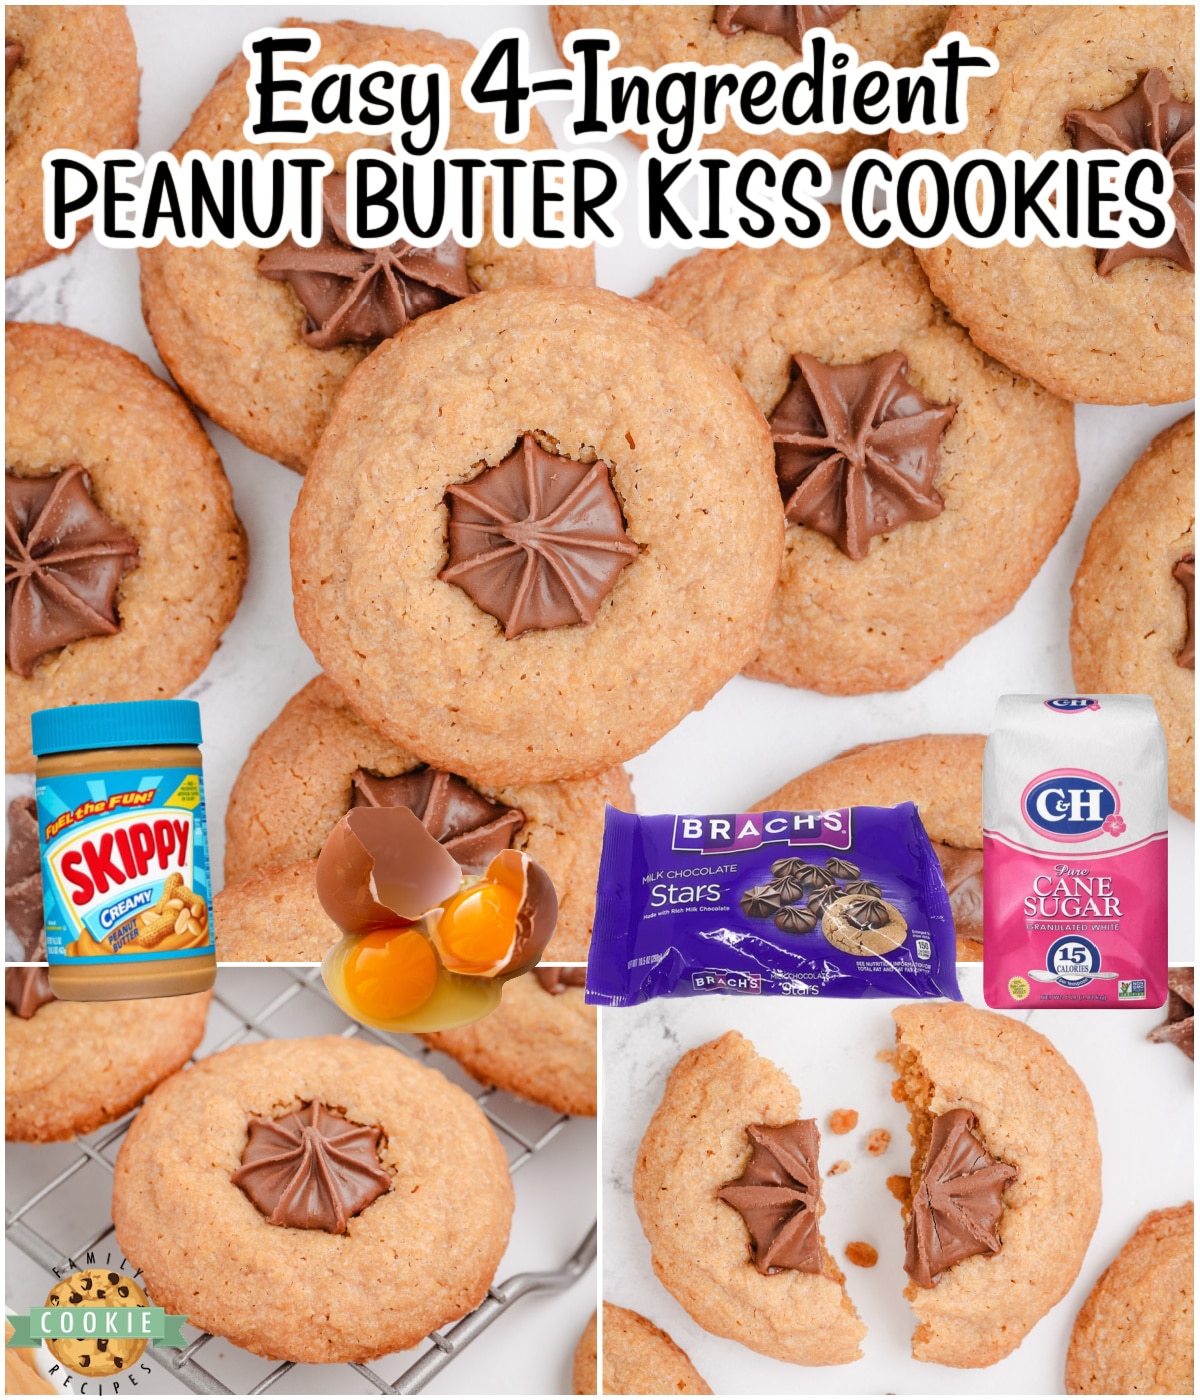 Easy Peanut Butter Kiss Cookies are made with 4 simple ingredients: peanut butter, sugar, eggs & topped with star kisses! These Hershey kisses peanut butter cookies have a rich, nutty flavor with a sweet, chocolatey finish.